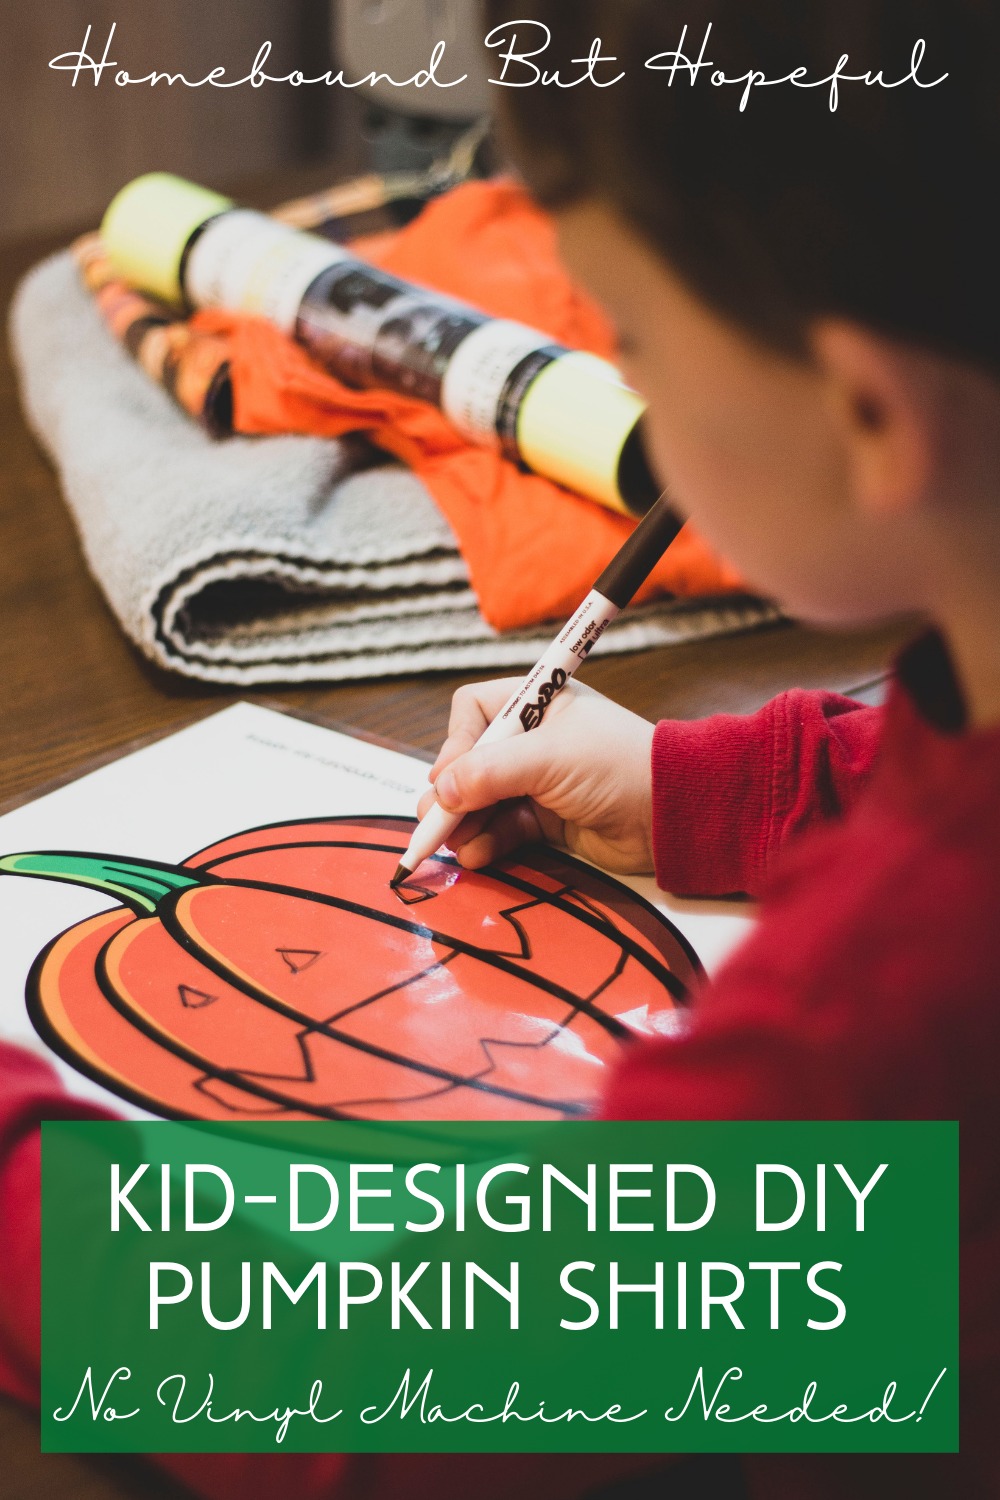 Let your kids get creative this Halloween by designing their own DIY pumpkin shirts! These tops are so quick and easy, and don't require any special equipment.